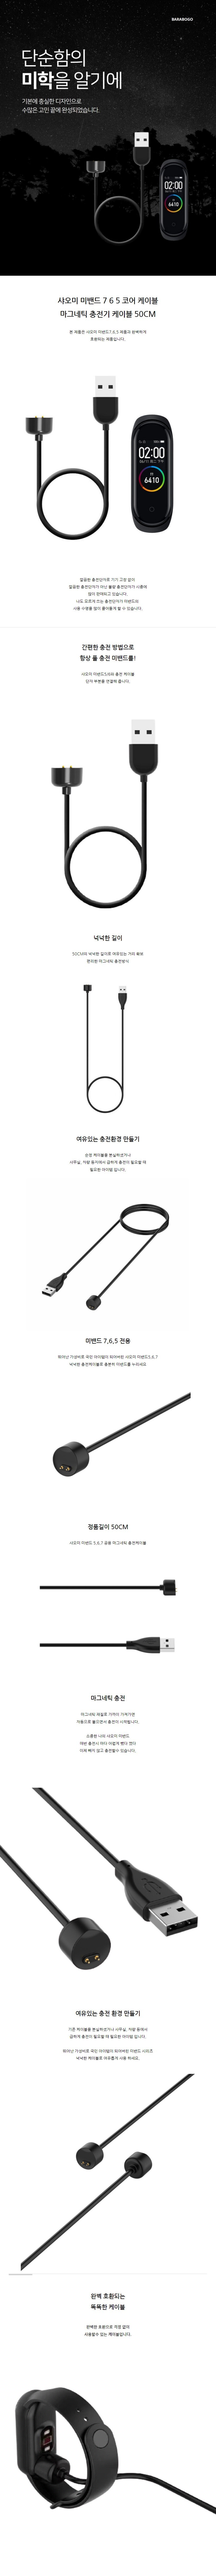 miband7cable.jpg